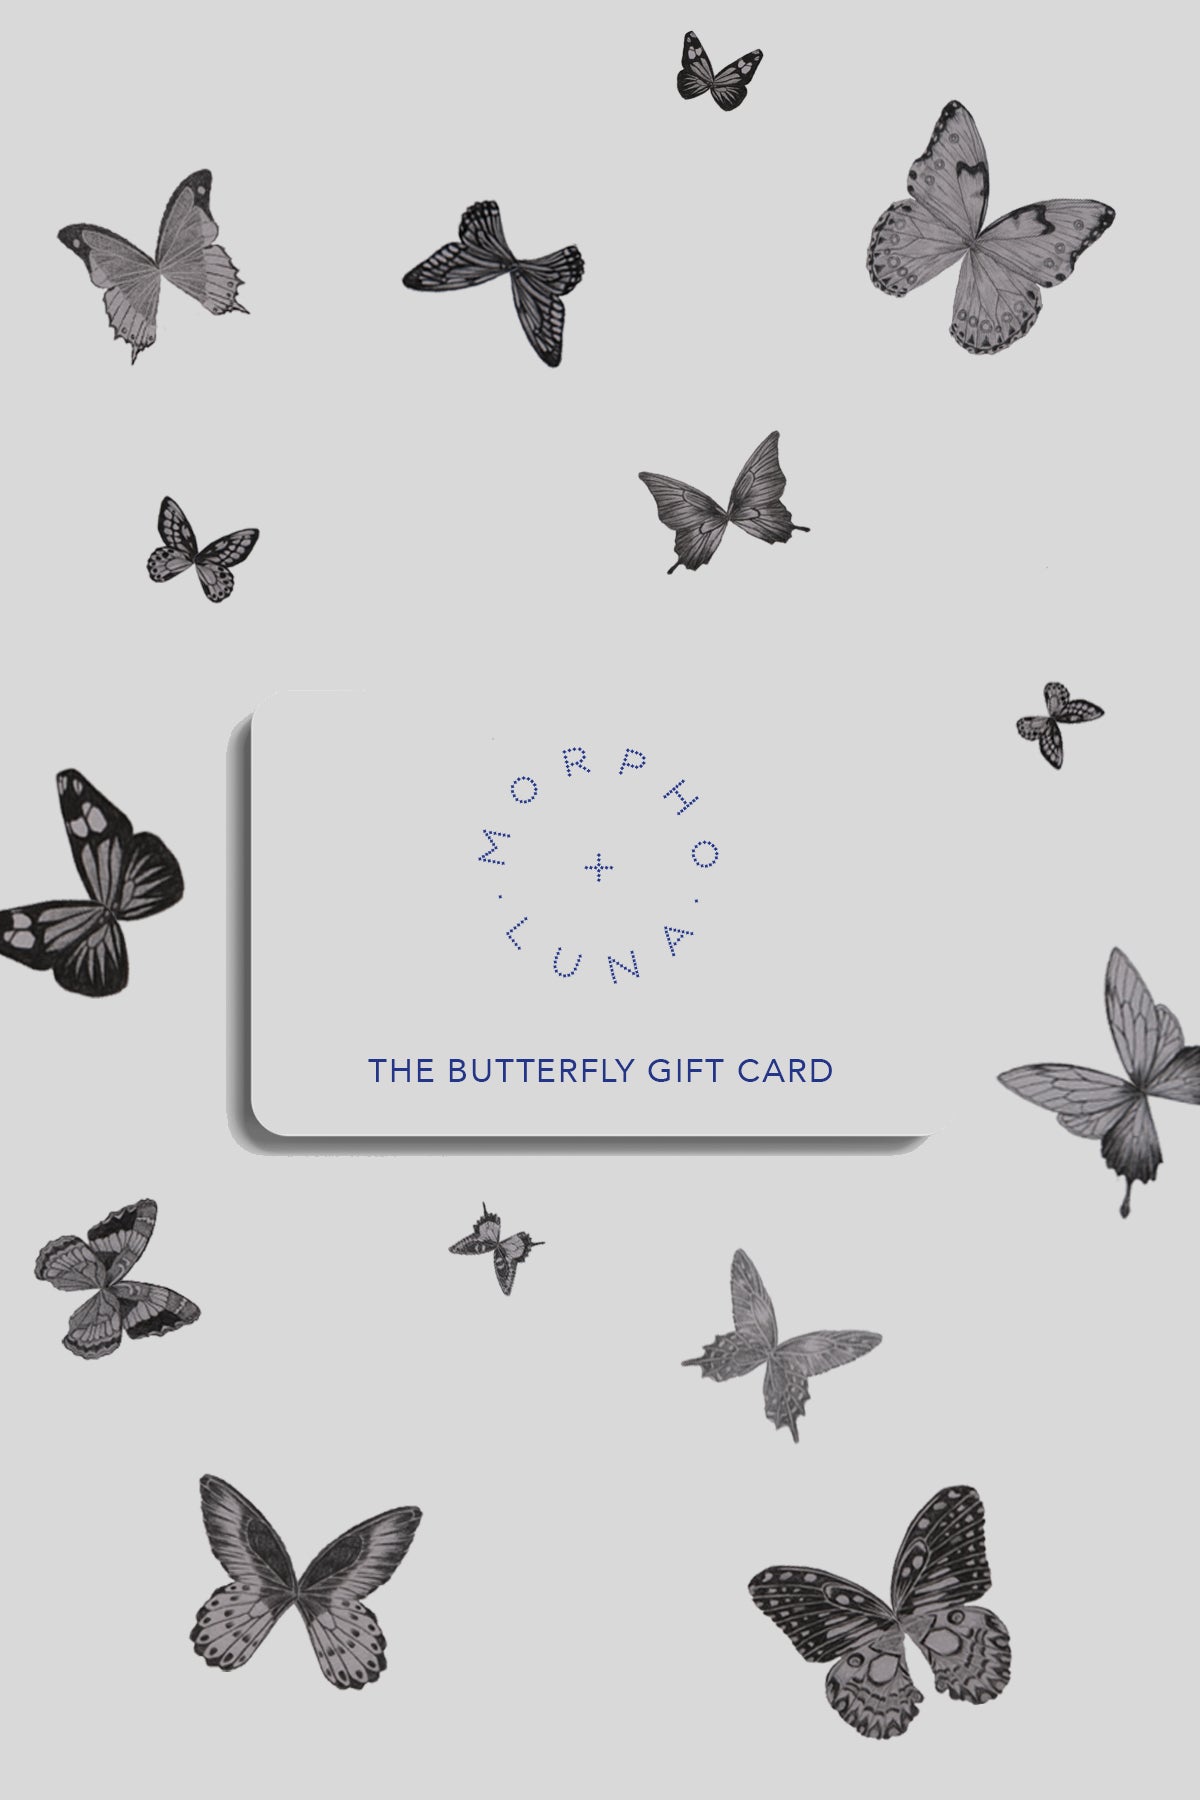 THE BUTTERFLY GIFT CARD